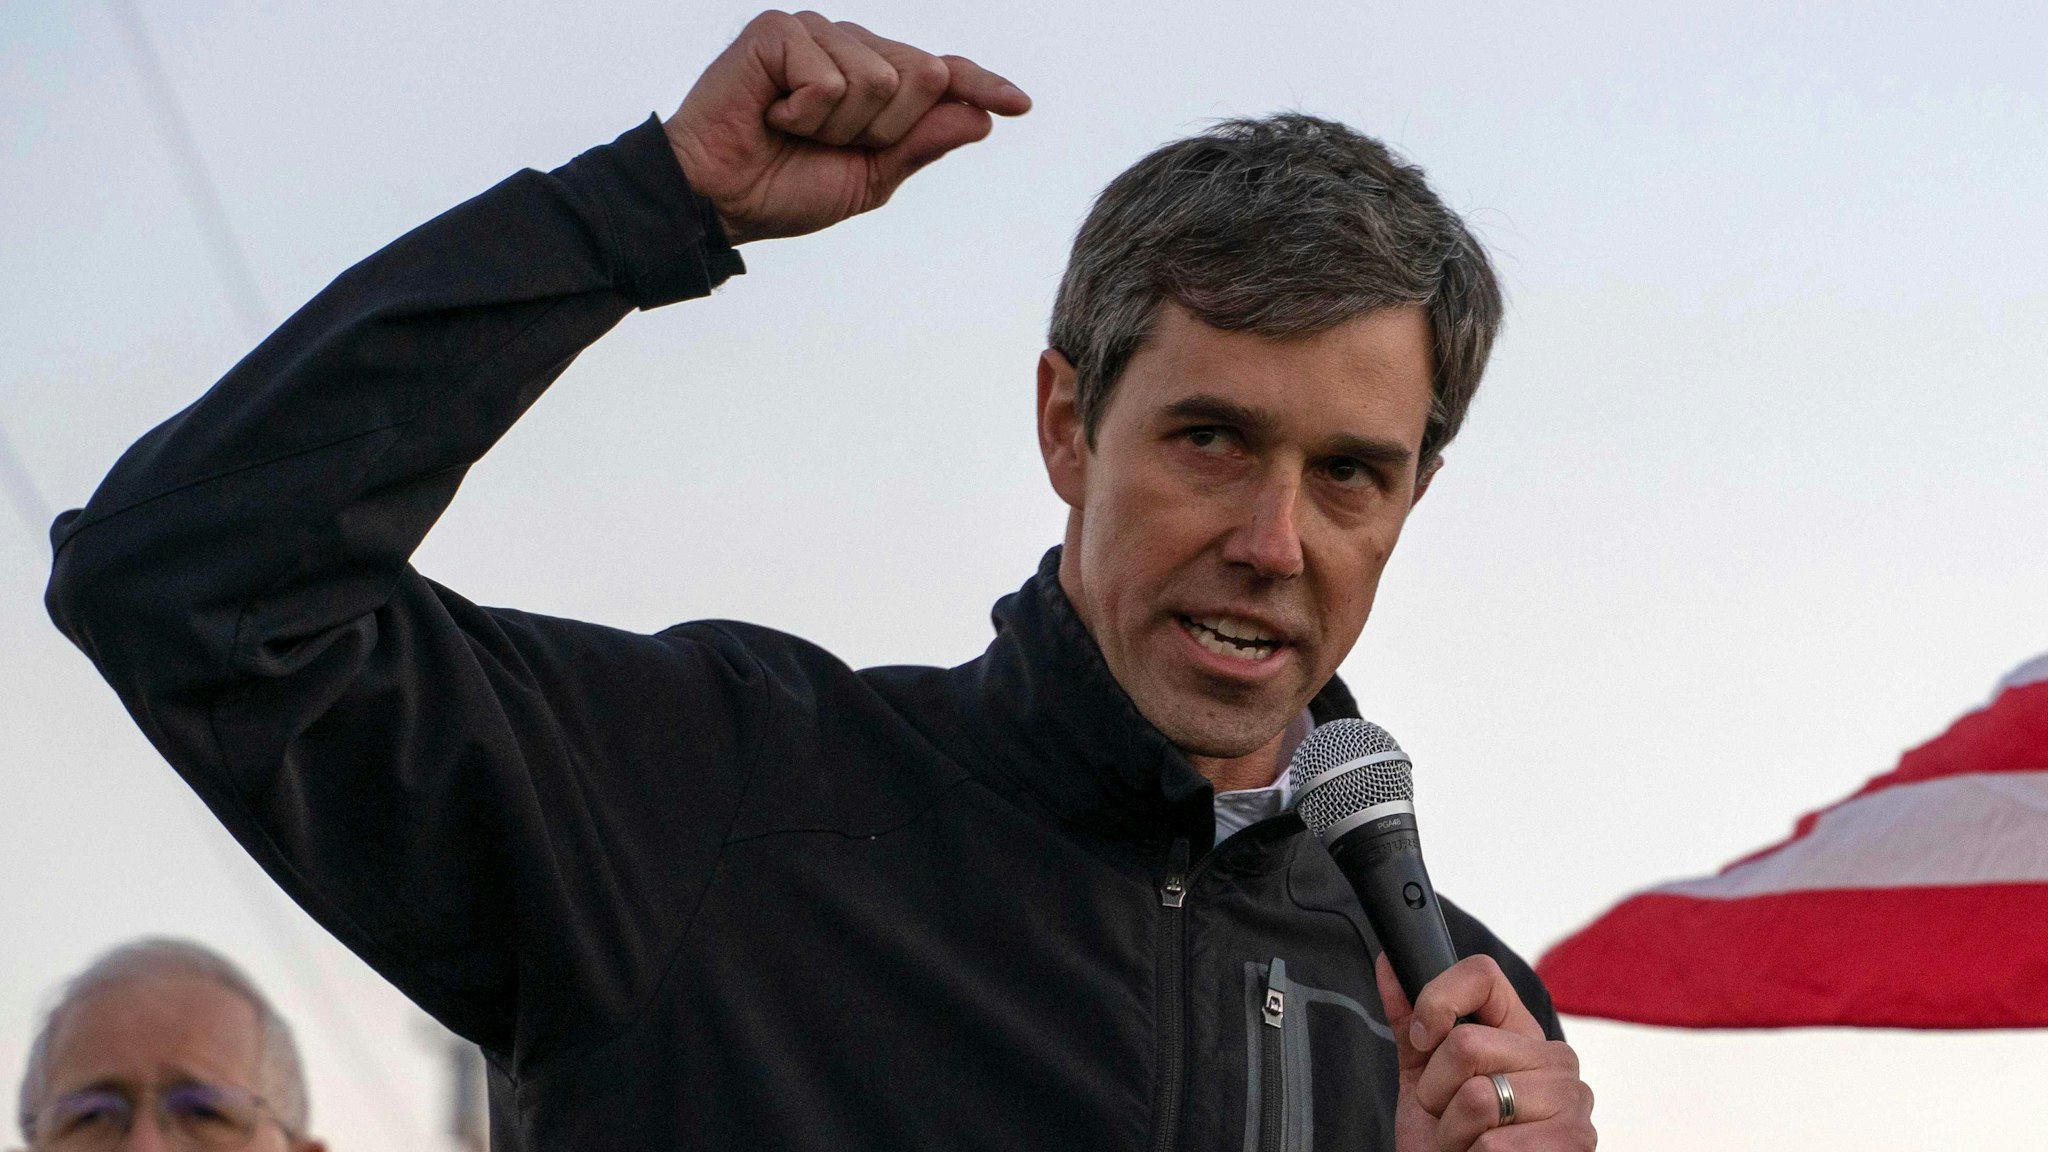 Former Texas Congressman Beto O'Rourke speaks to a crowd of marchers during the anti-Trump "March for Truth" in El Paso, Texas, on February 11, 2019.